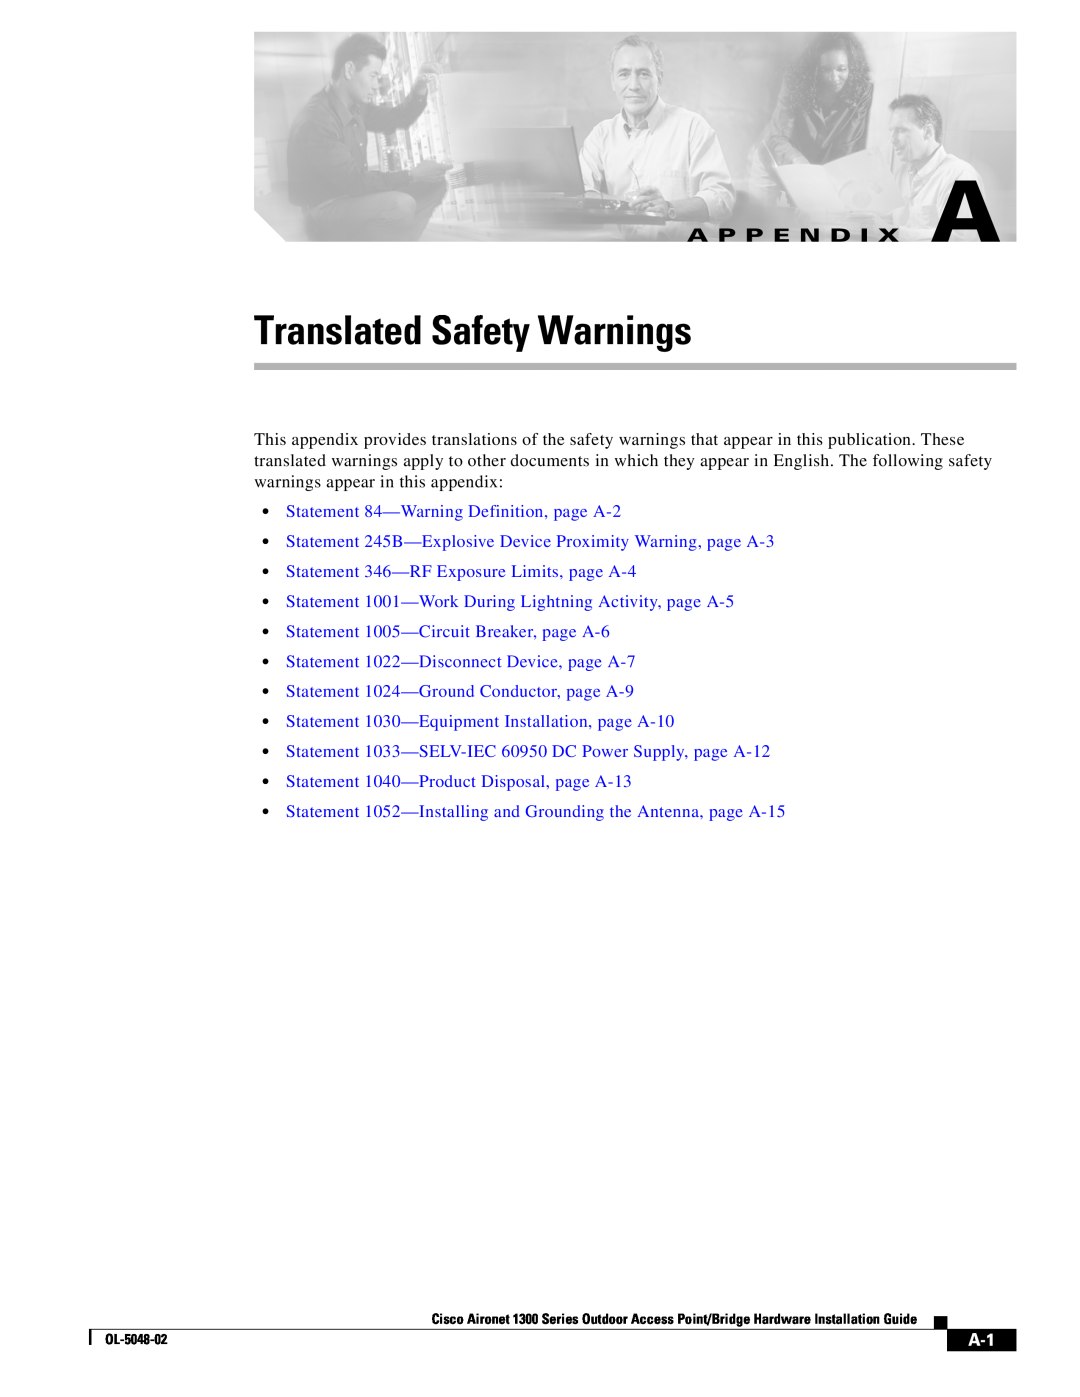 Cisco Systems 1300 Series manual Translated Safety Warnings, A P P E N D I X A, Statement 84-Warning Definition, page A-2 